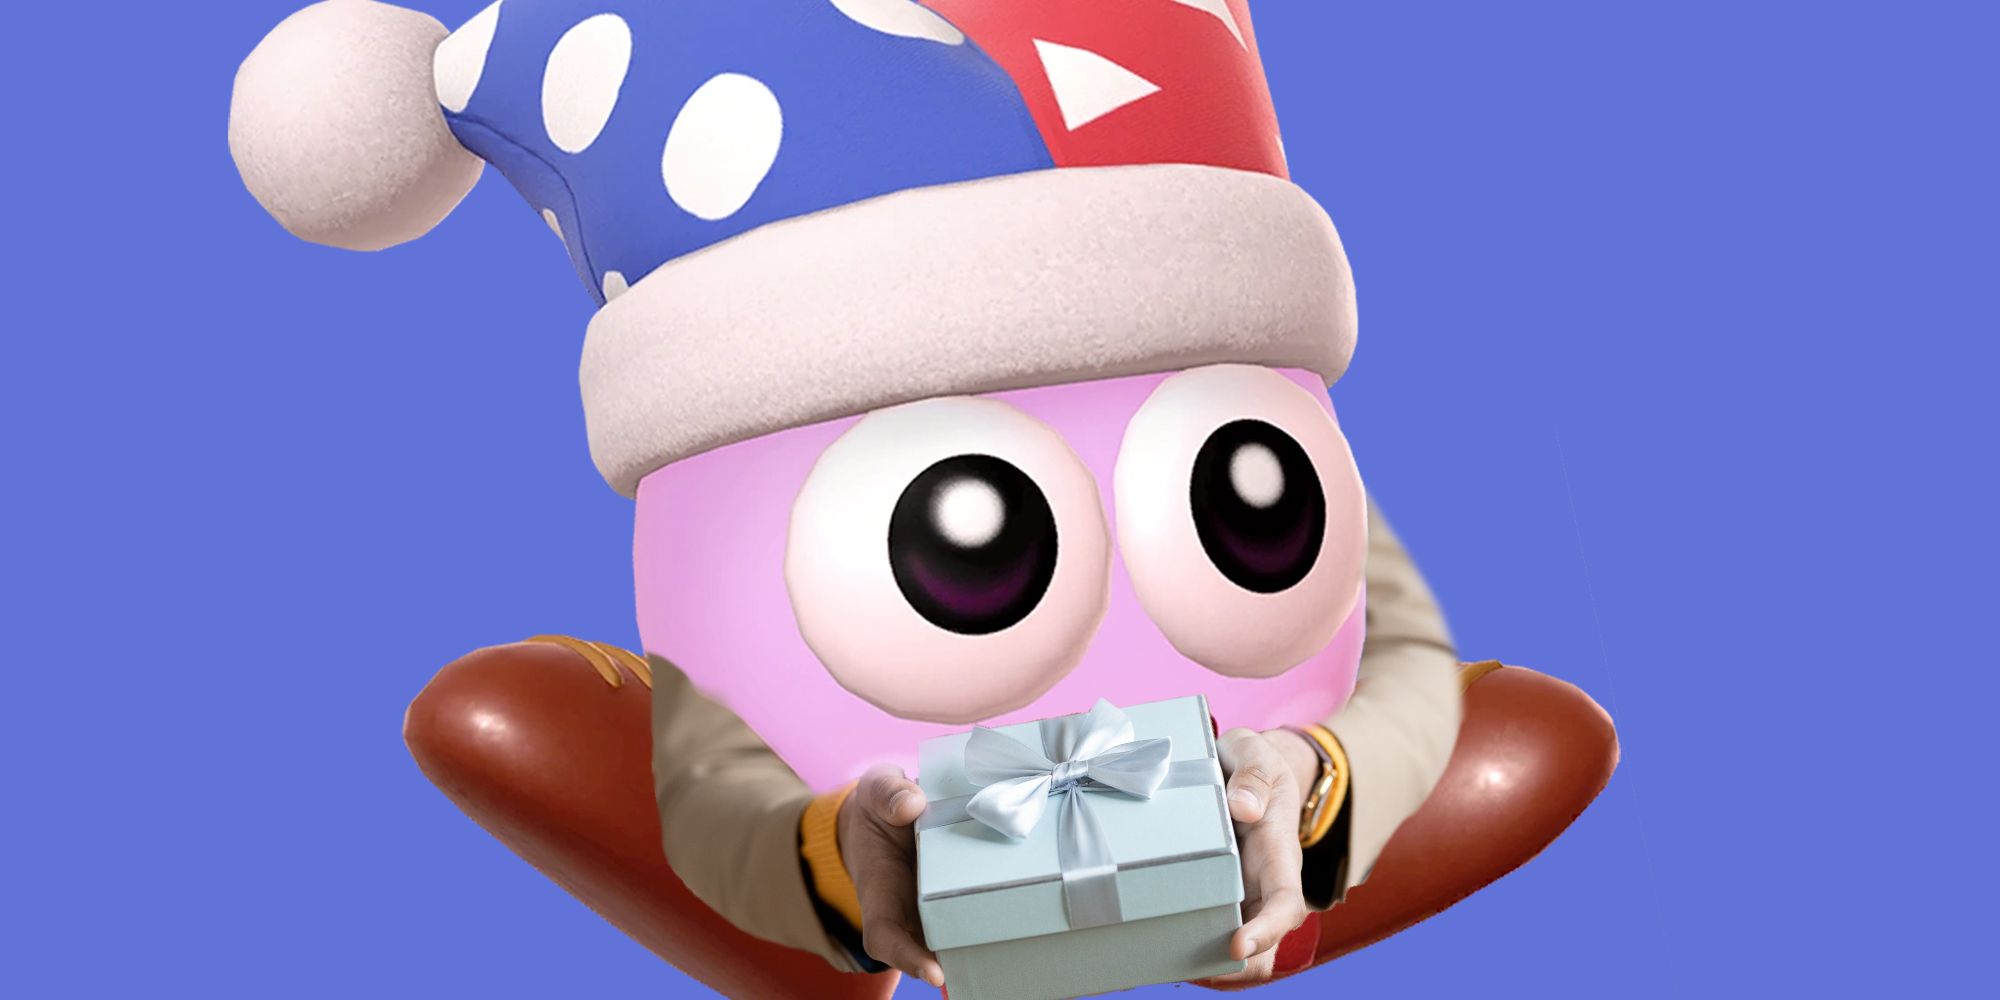 Custom image - Marx with a gift